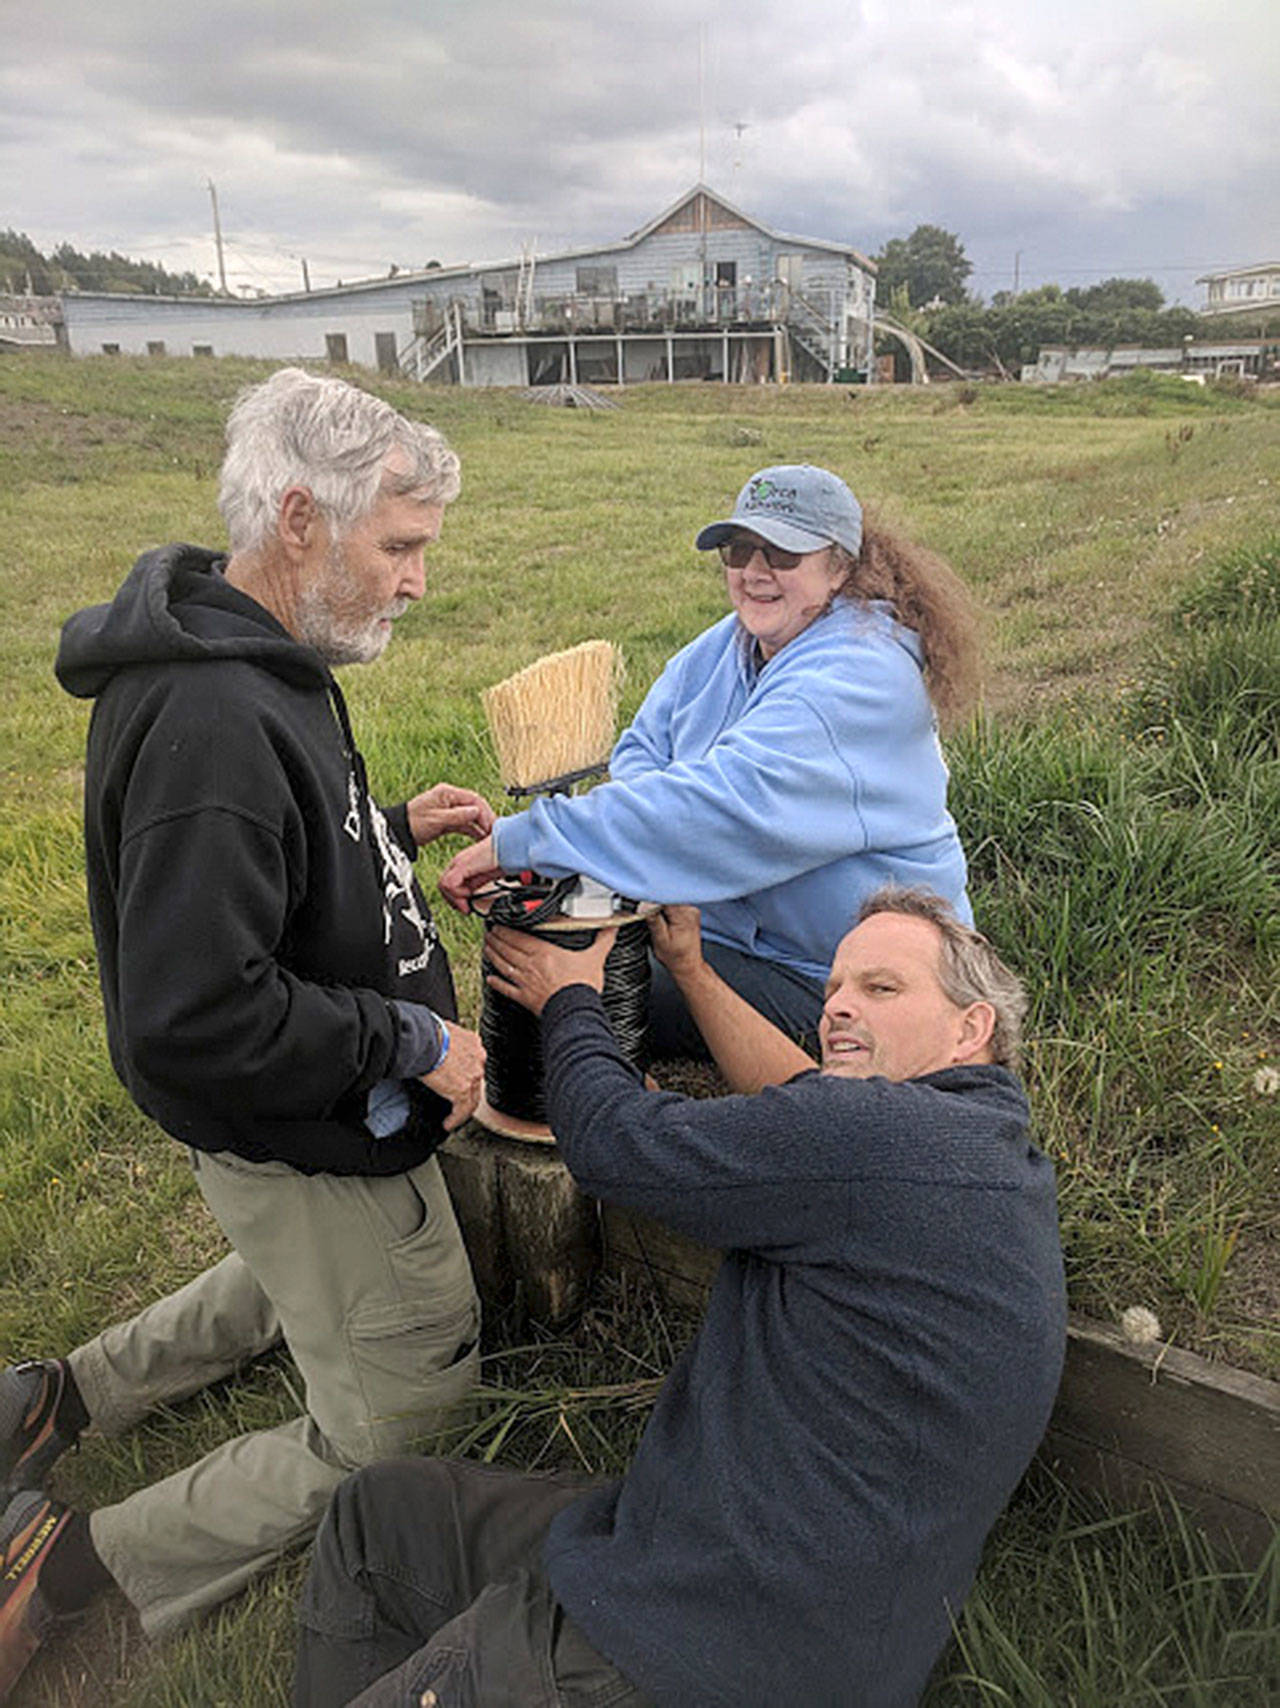 Howard Garrett, left, Susan Berta and Florian Graner roll out the long cable needed to install a hydrophone to listen to marine life. The research sound equipment is located at Bush Point in the sound path of killer whales and other marine mammals. (Photo provided)